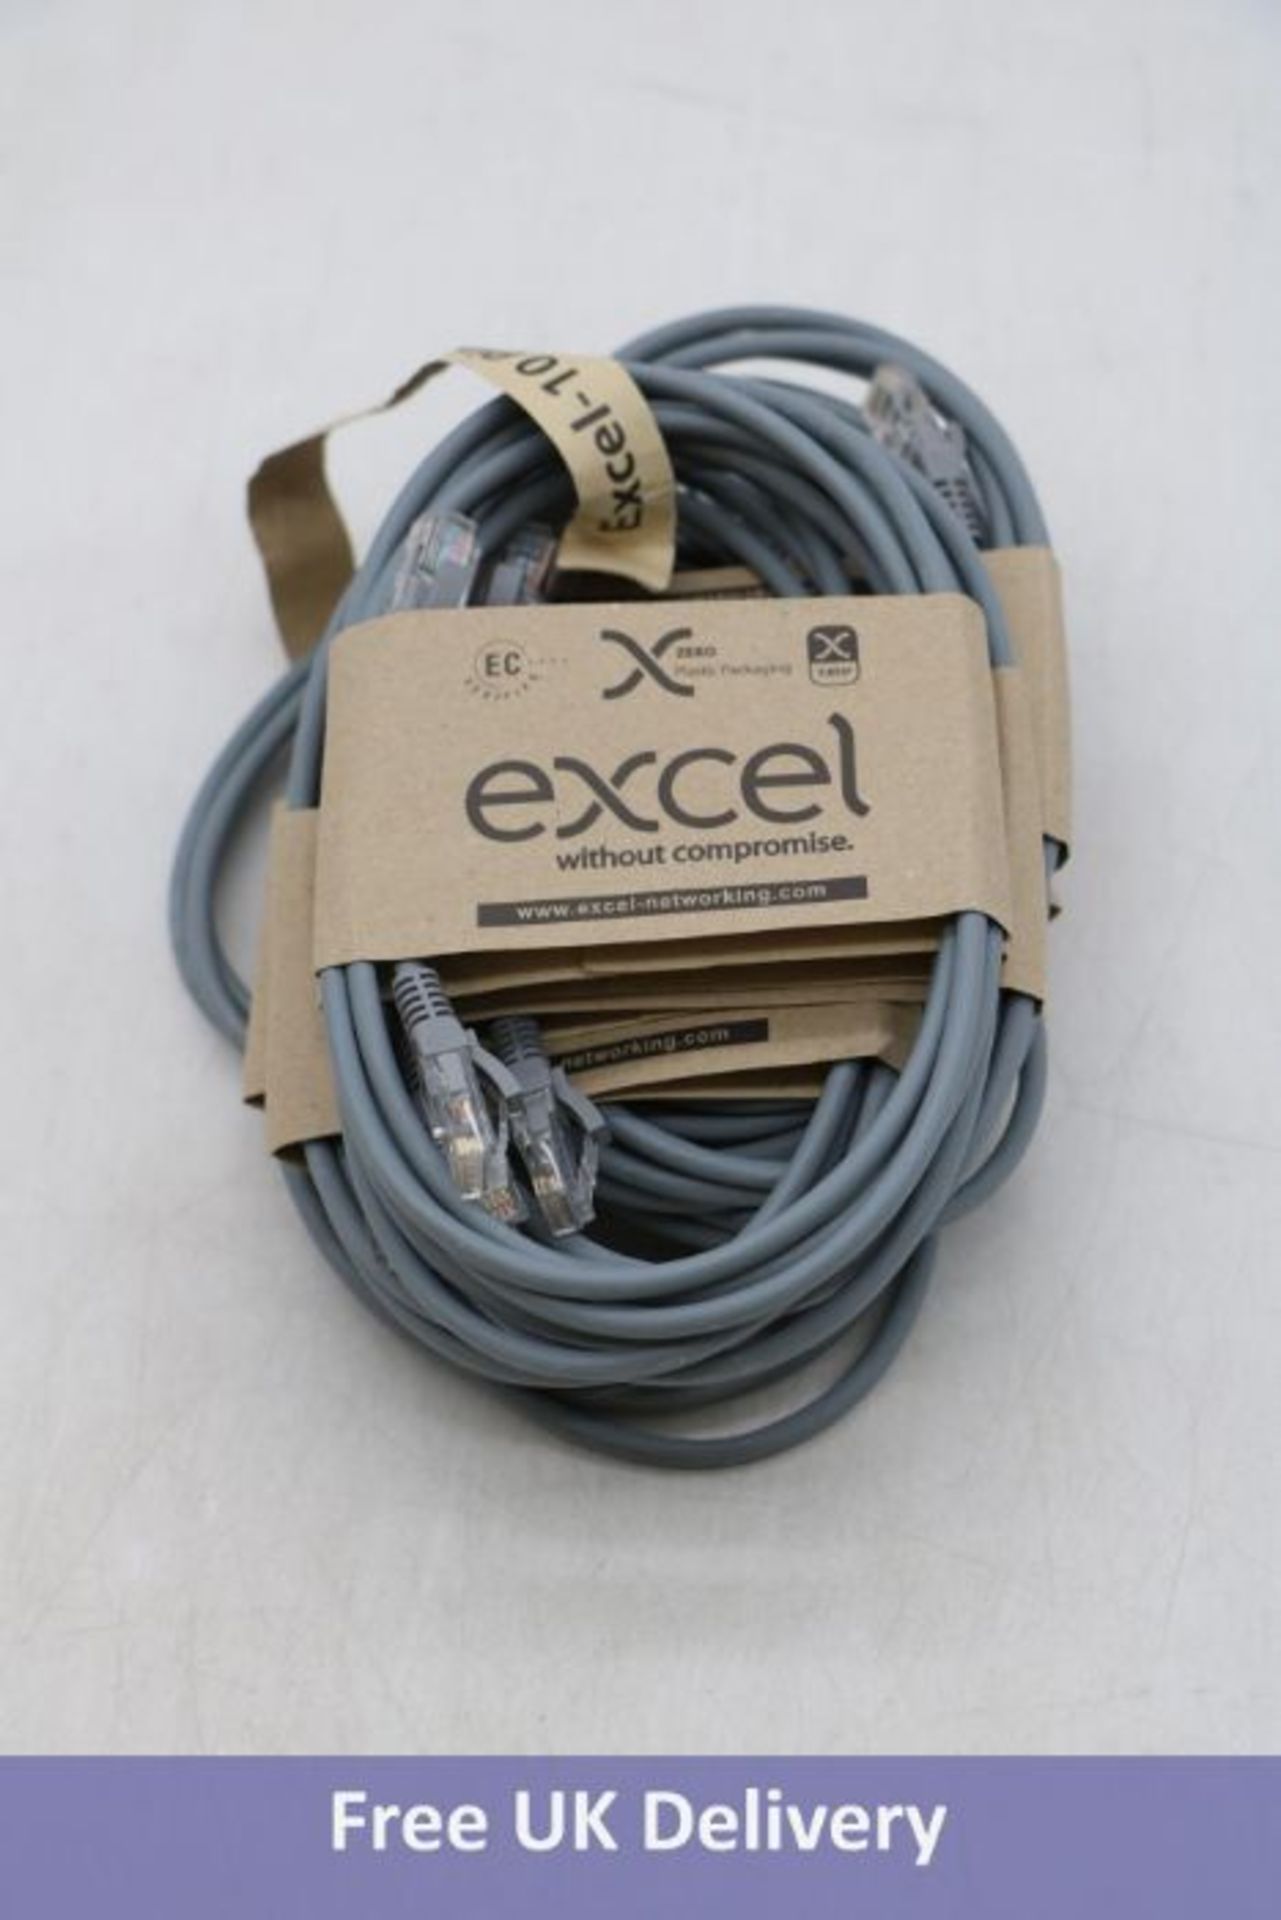 One-hundred Excel BB015MPLGE UTP 1.5 Metre Grey Cables